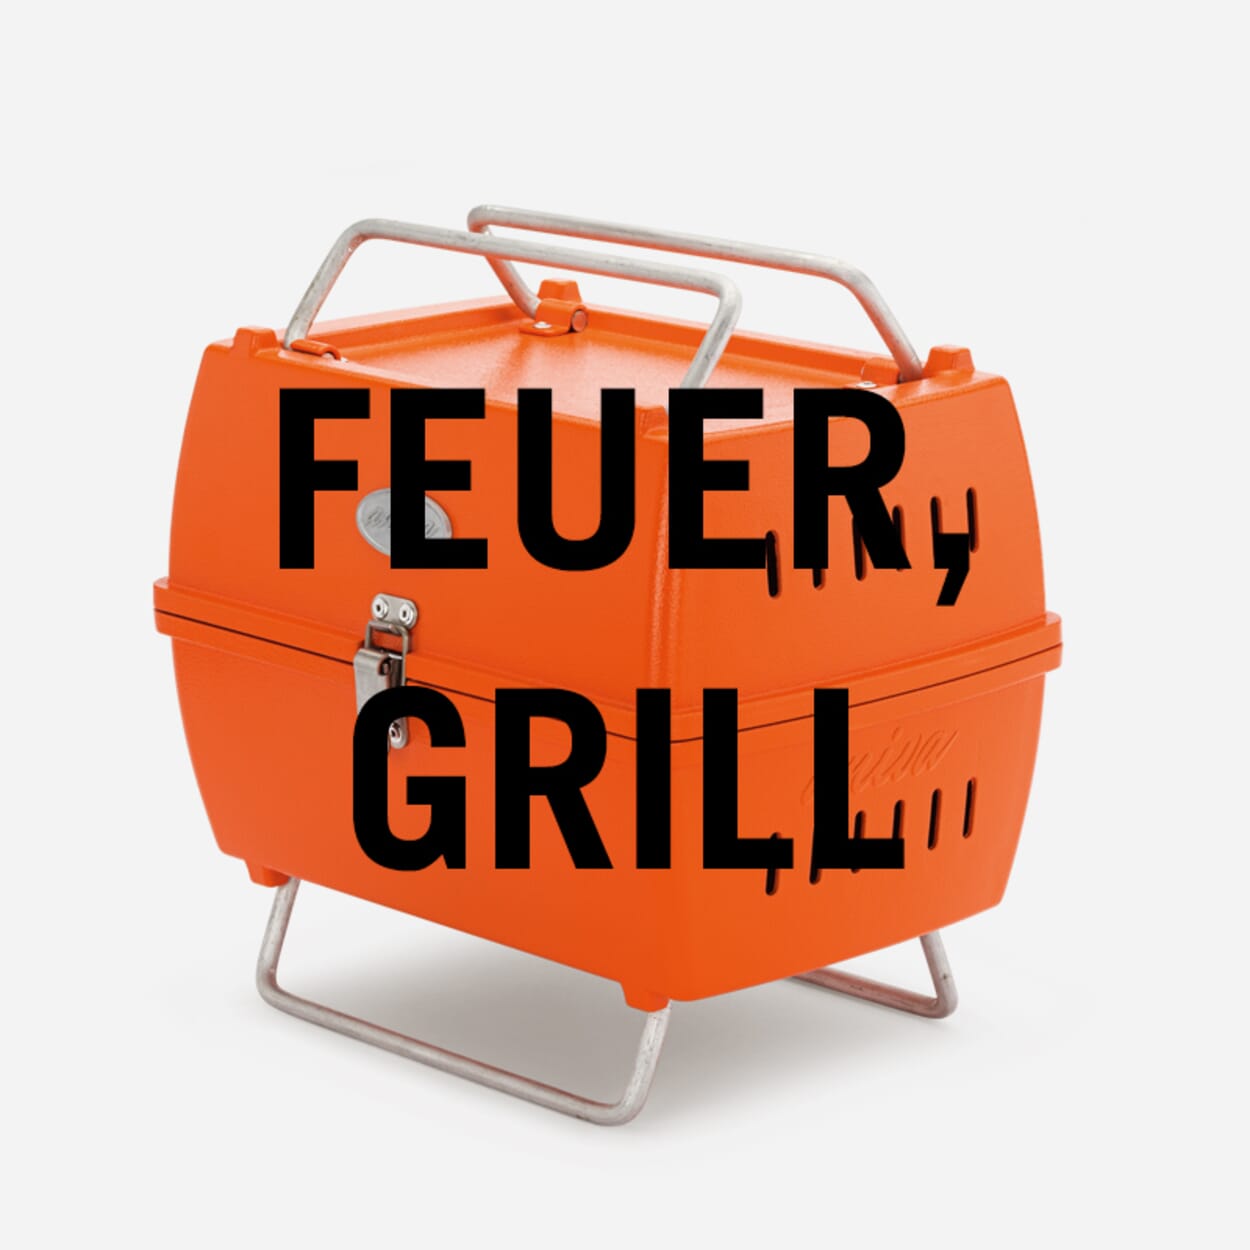 Feuer, Grill